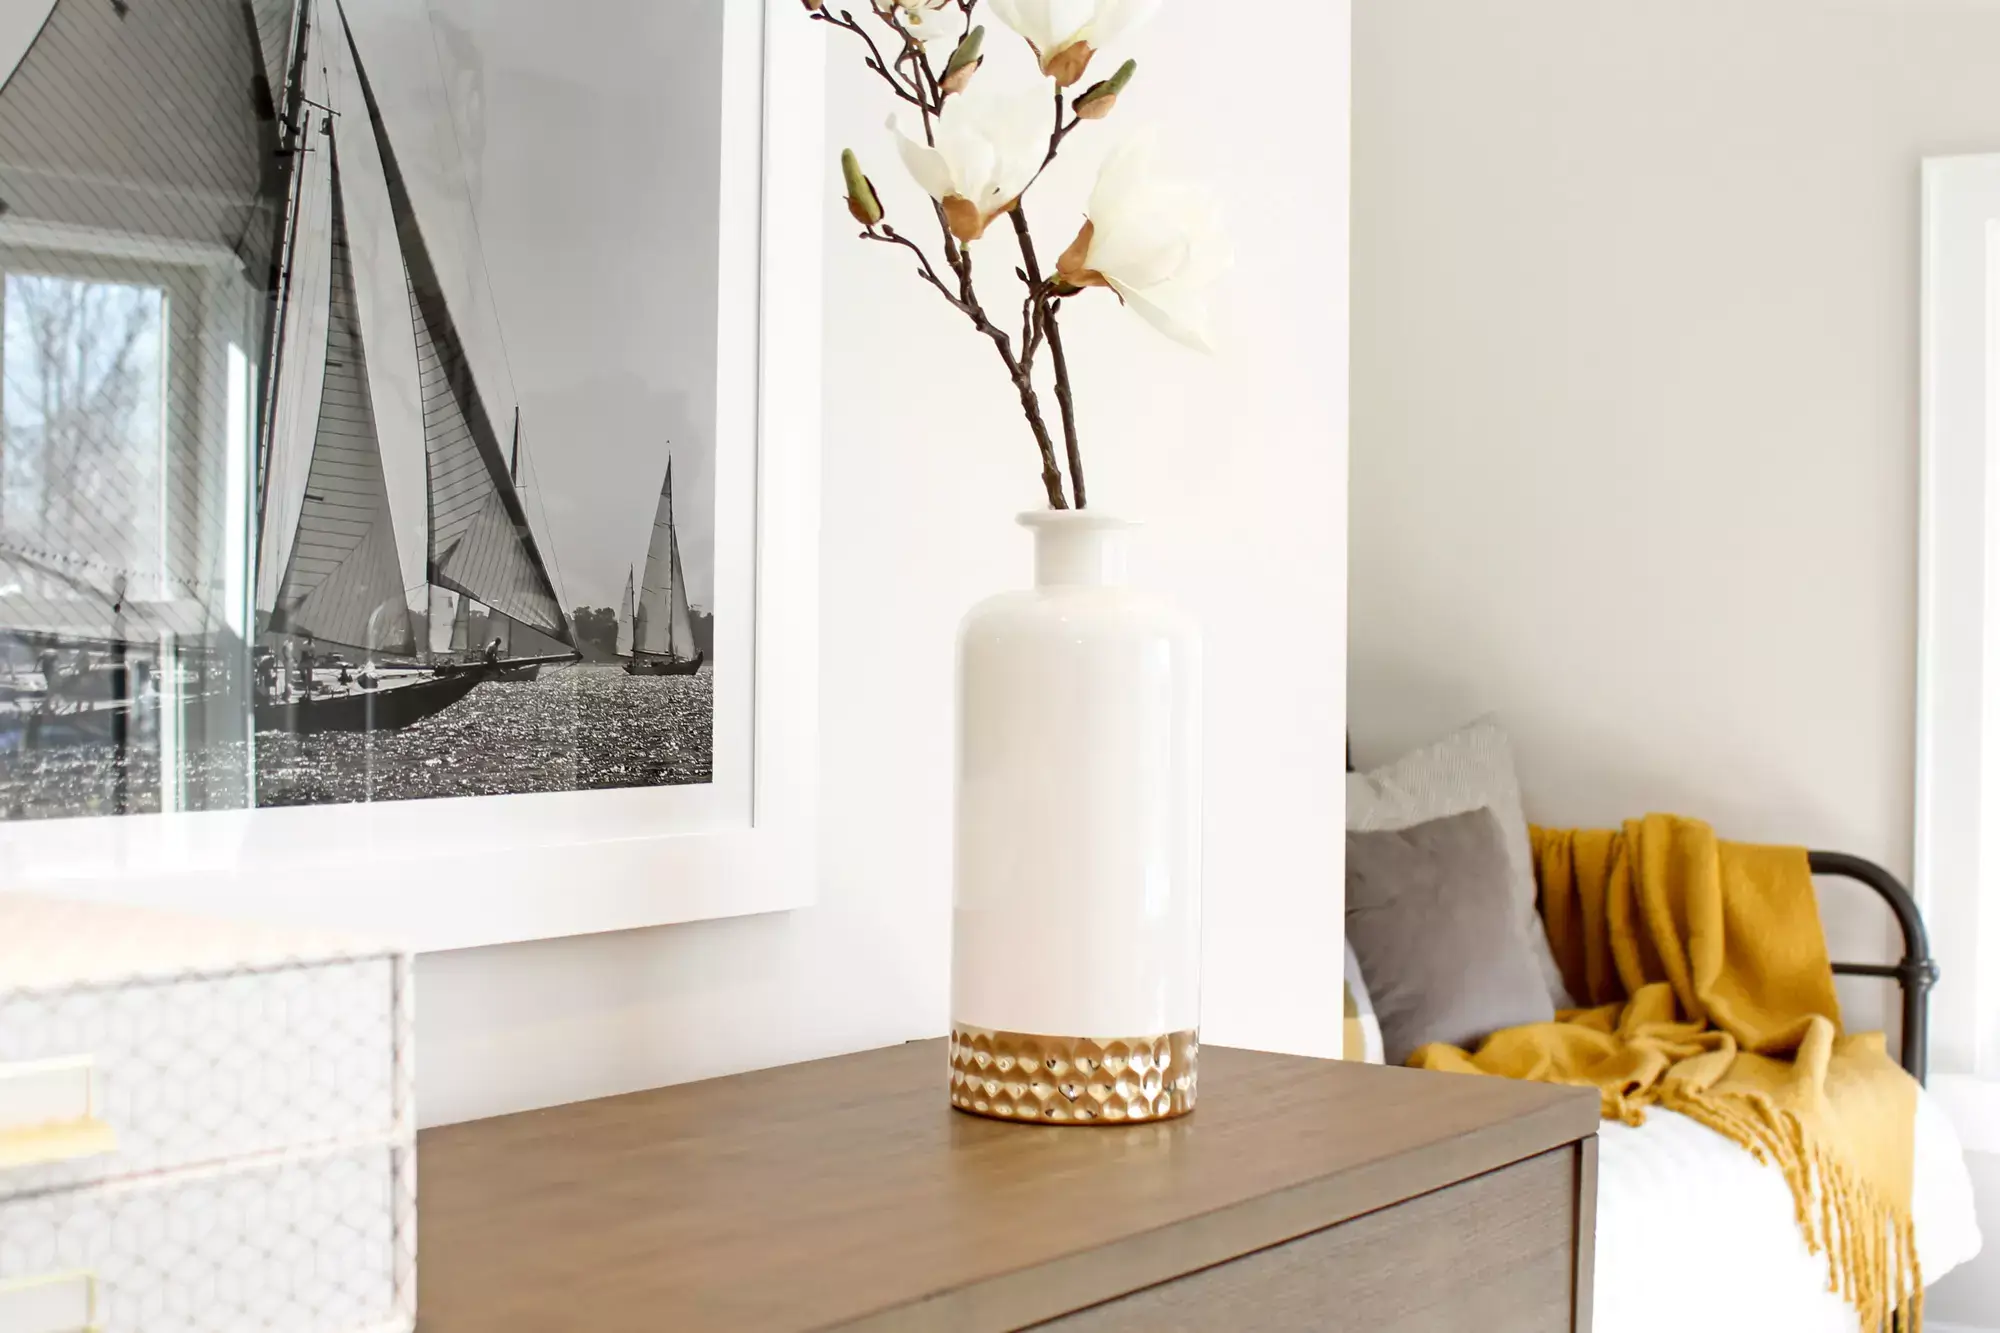 White flower vase on the wardrobe and a picture frame on the wall.